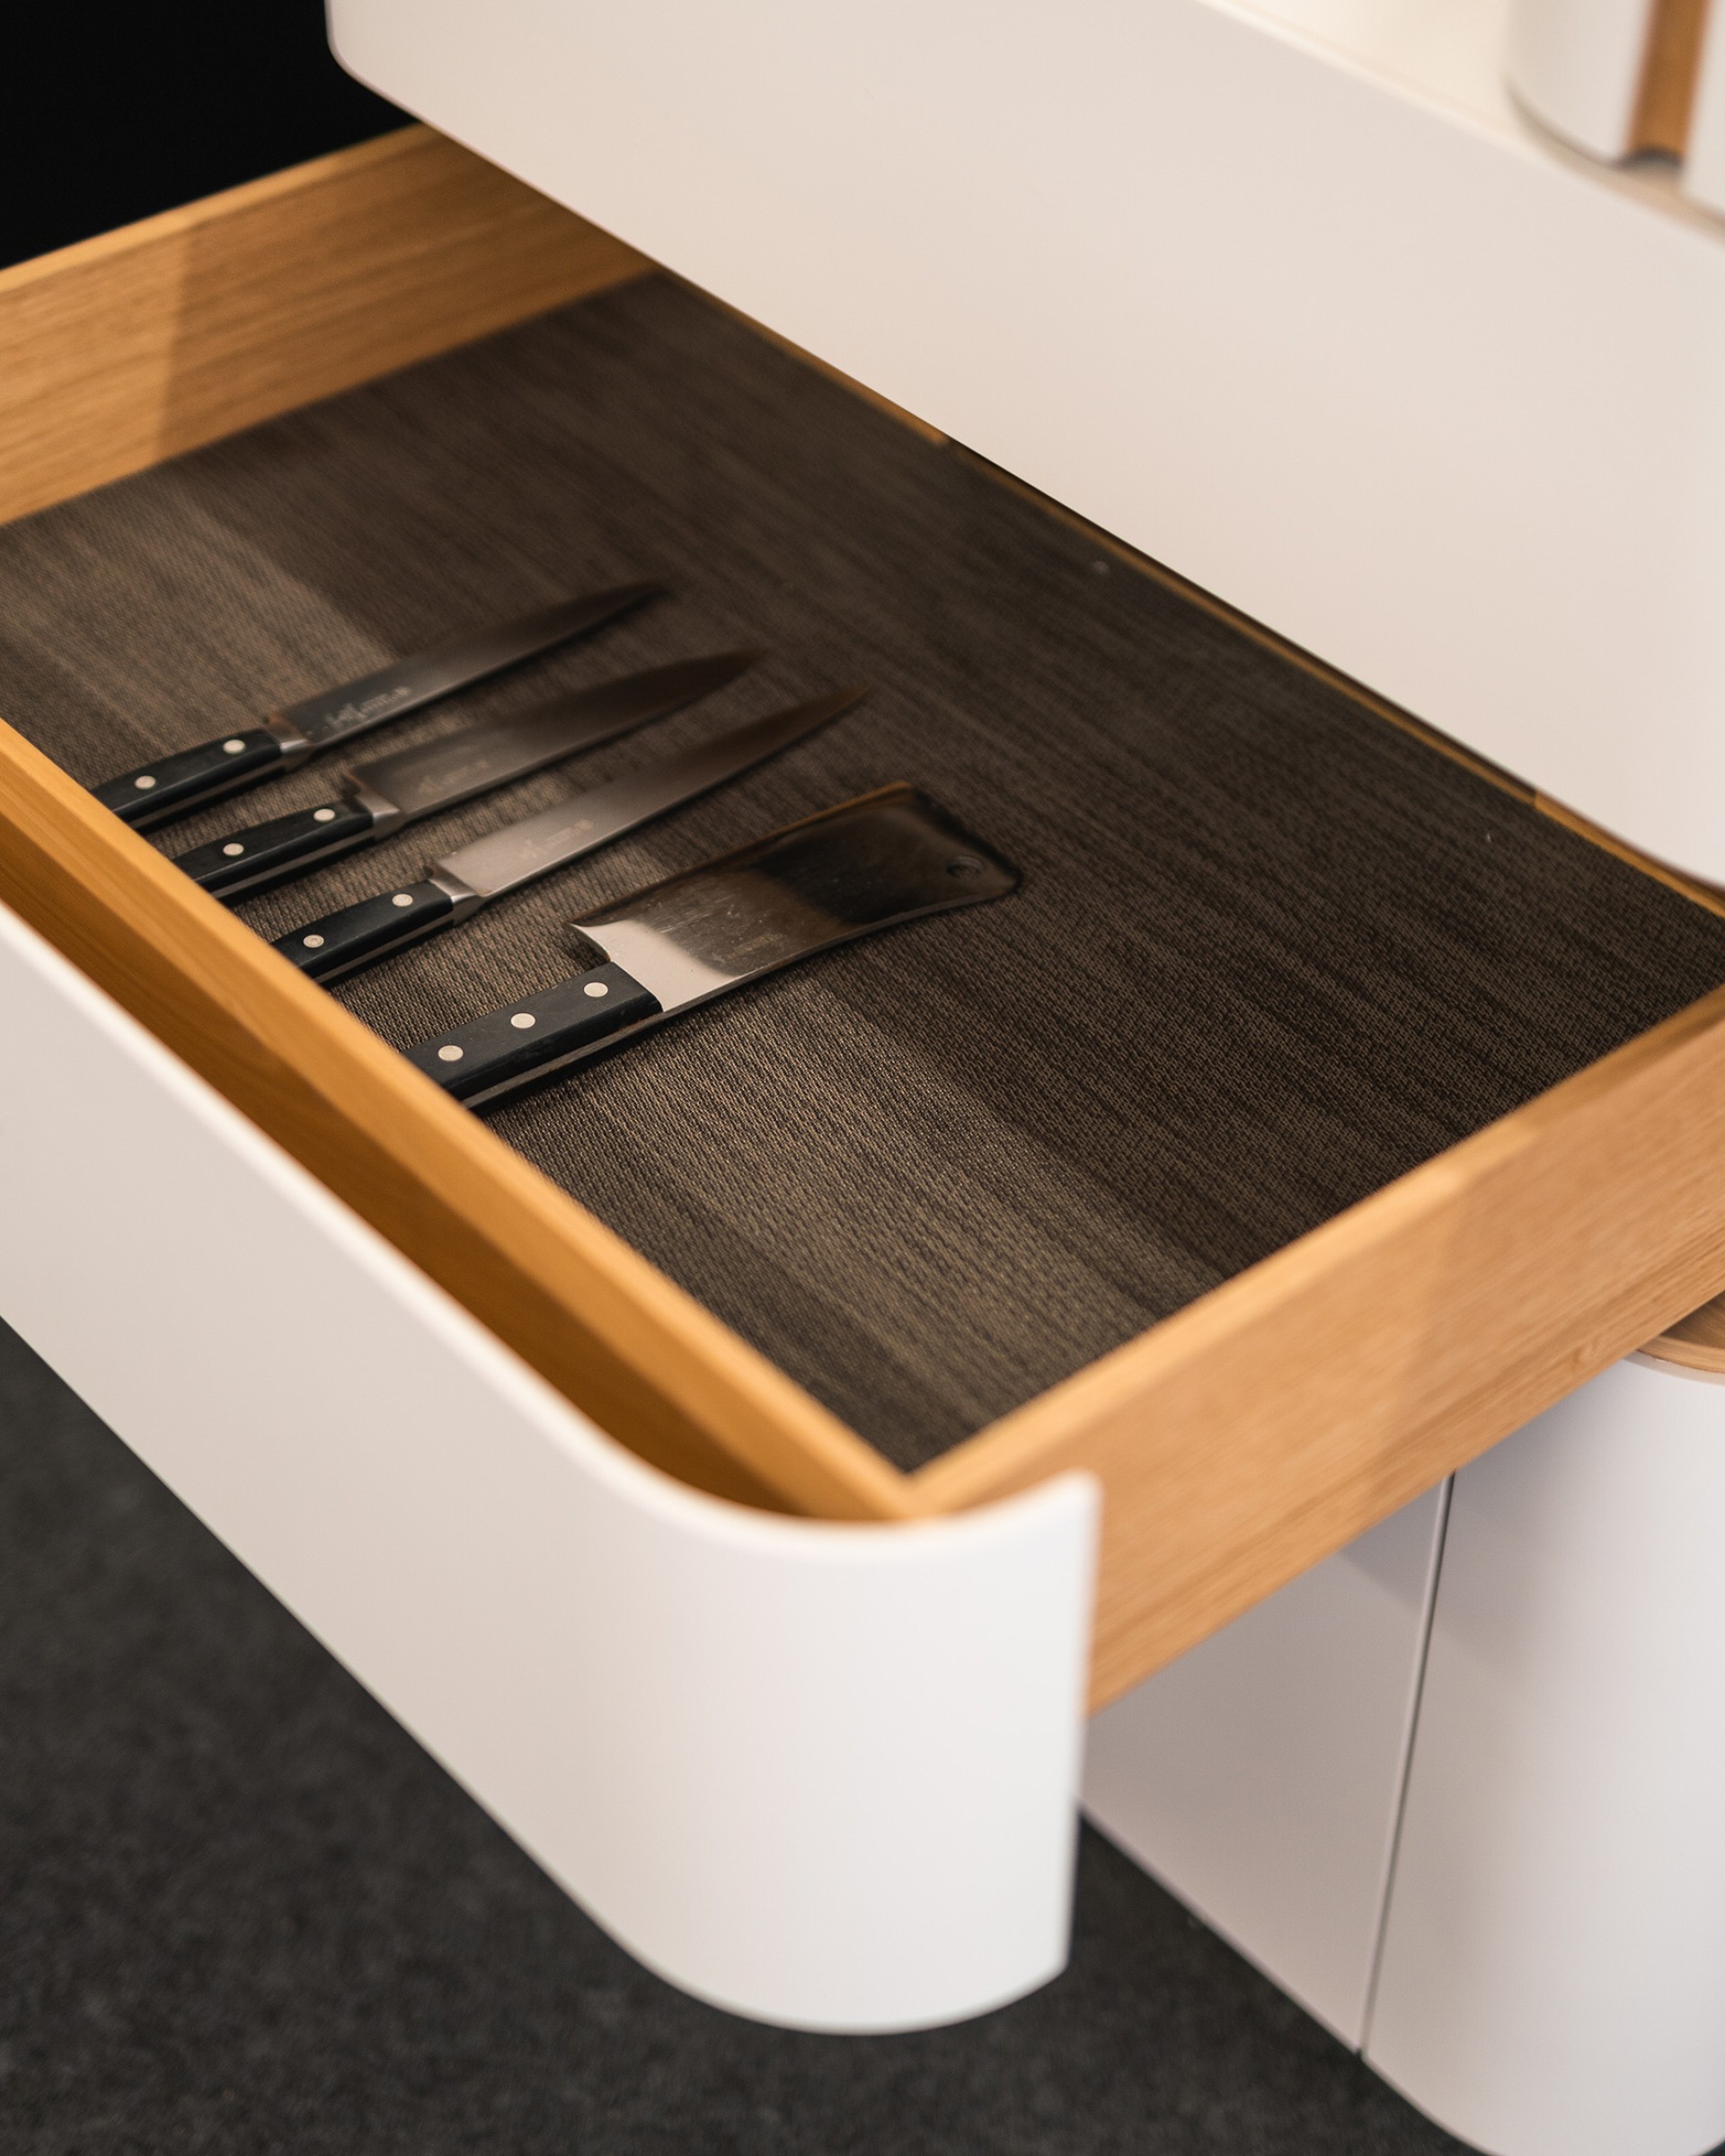 Benetorre Kitchen Tower open drawer with knives